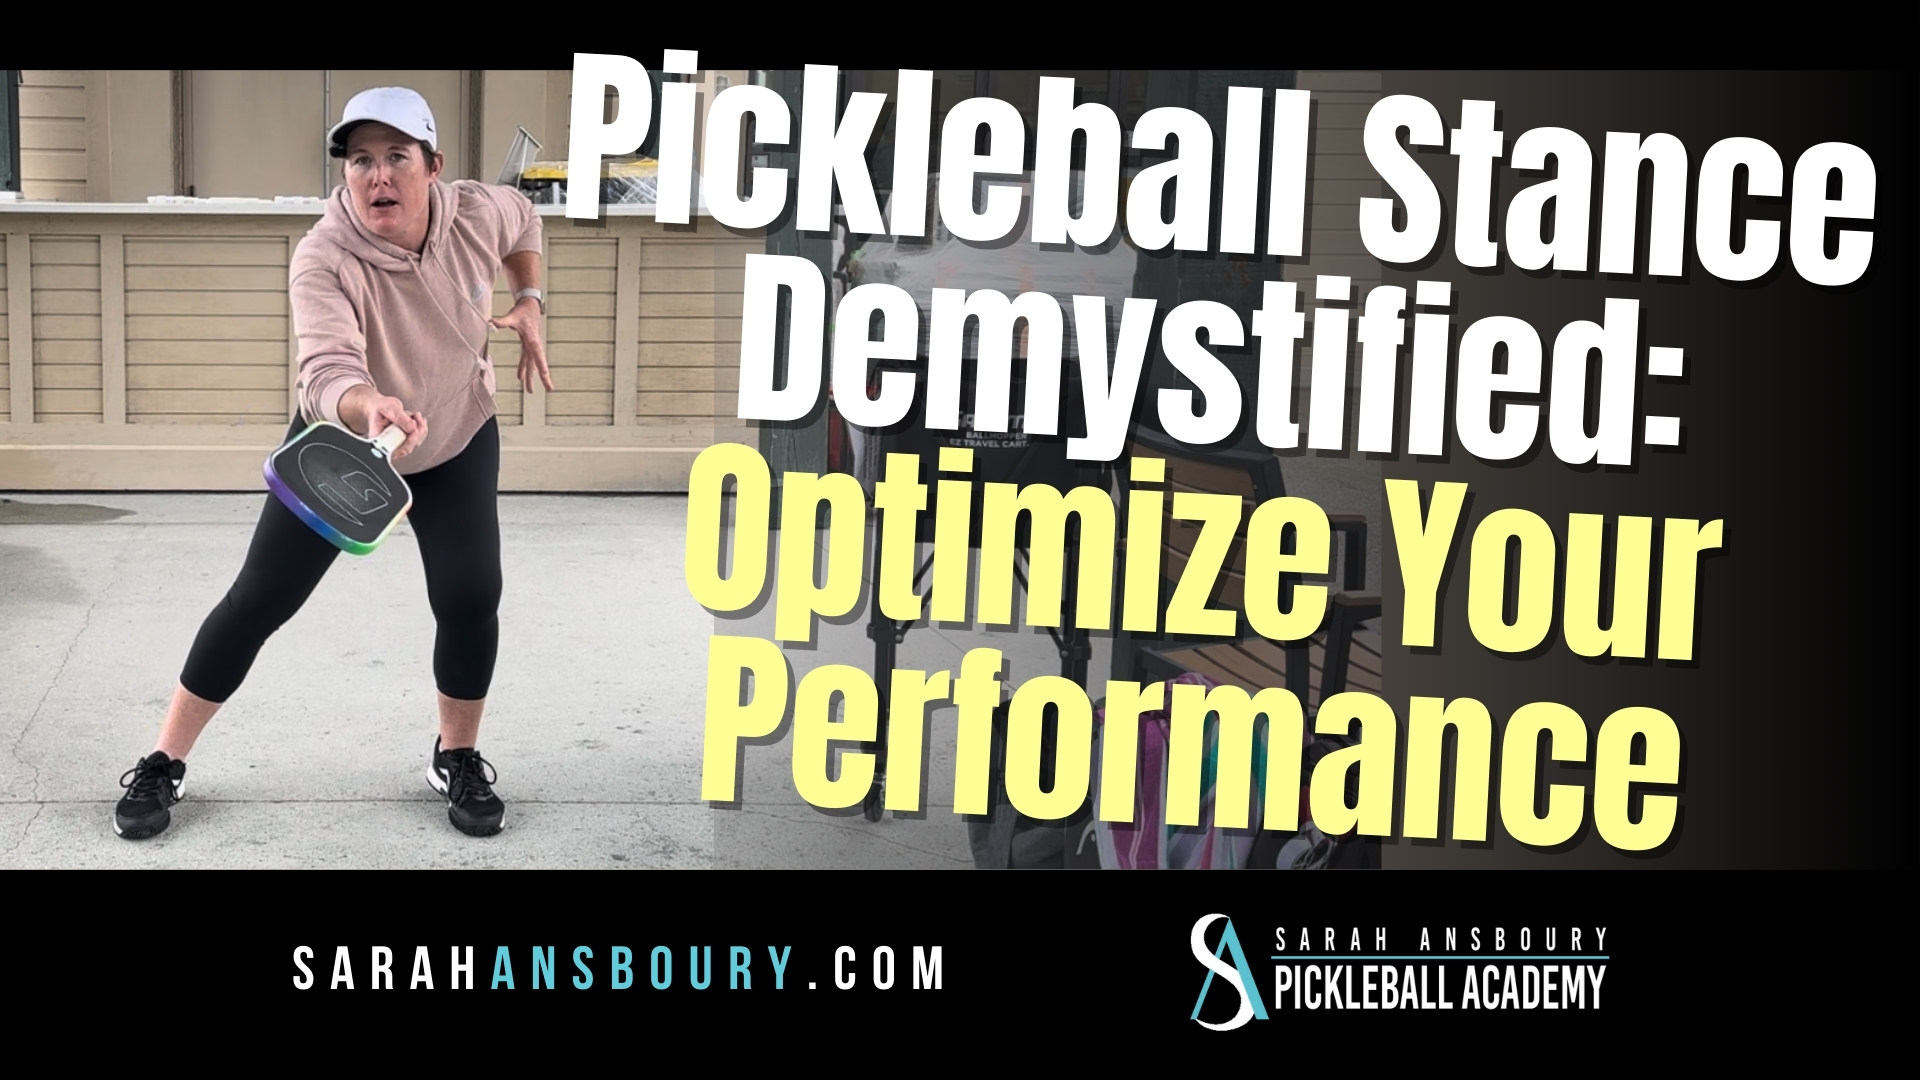 What Is Proper Pickleball Stance?